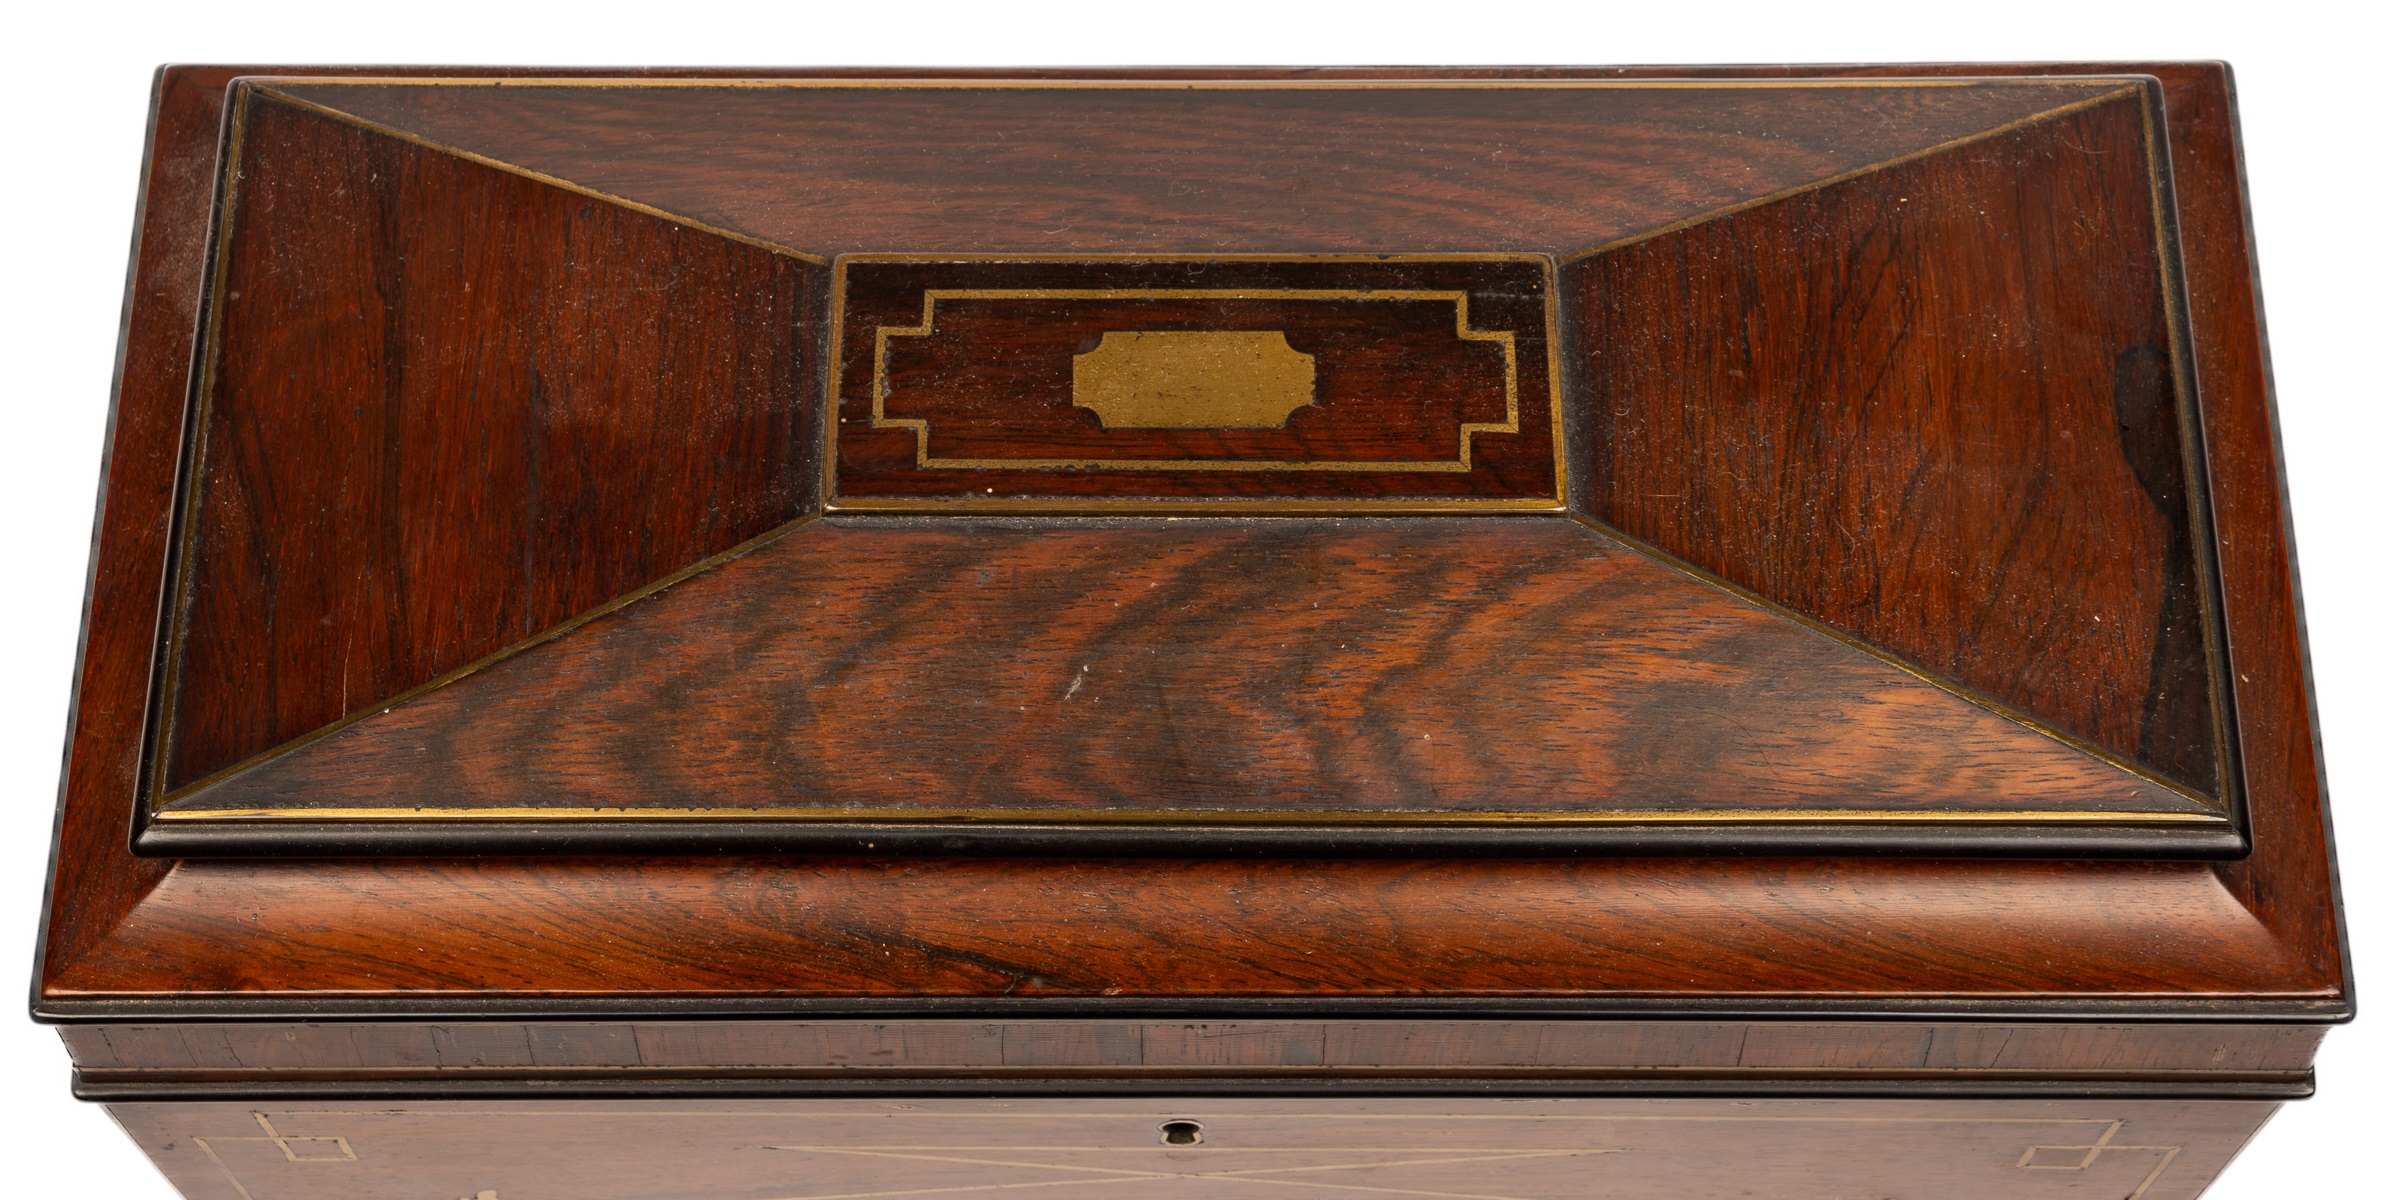 A rosewood tea caddy with brass inlaid banding - Image 6 of 6